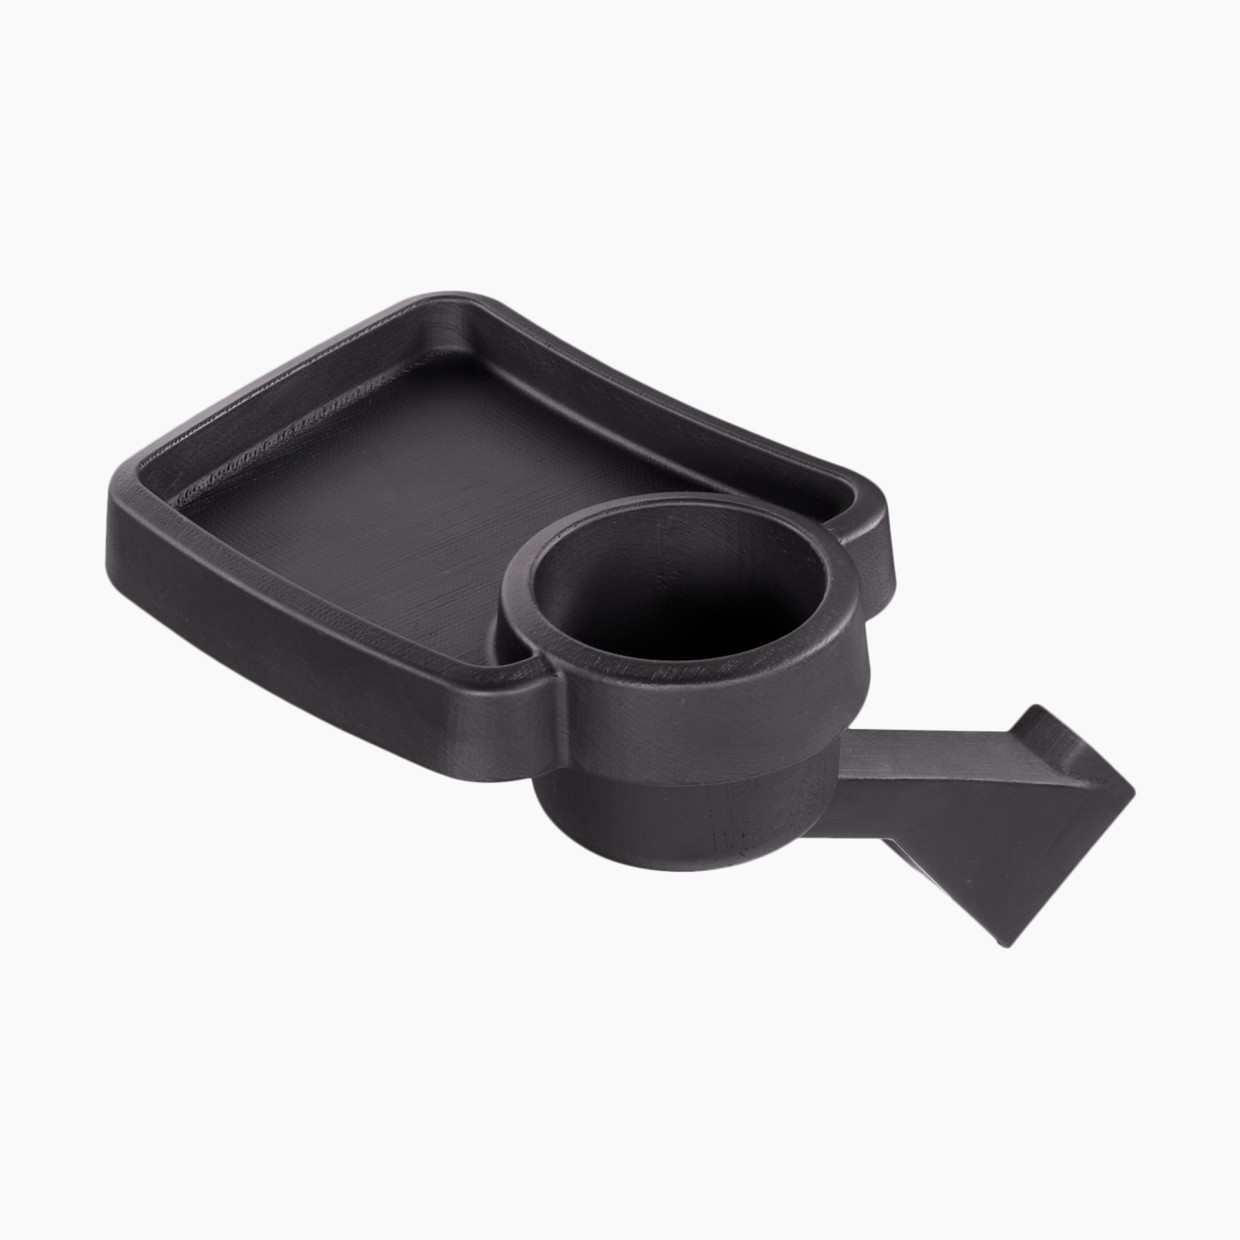 Thule Snack Tray for Urban Glide Strollers - Black.